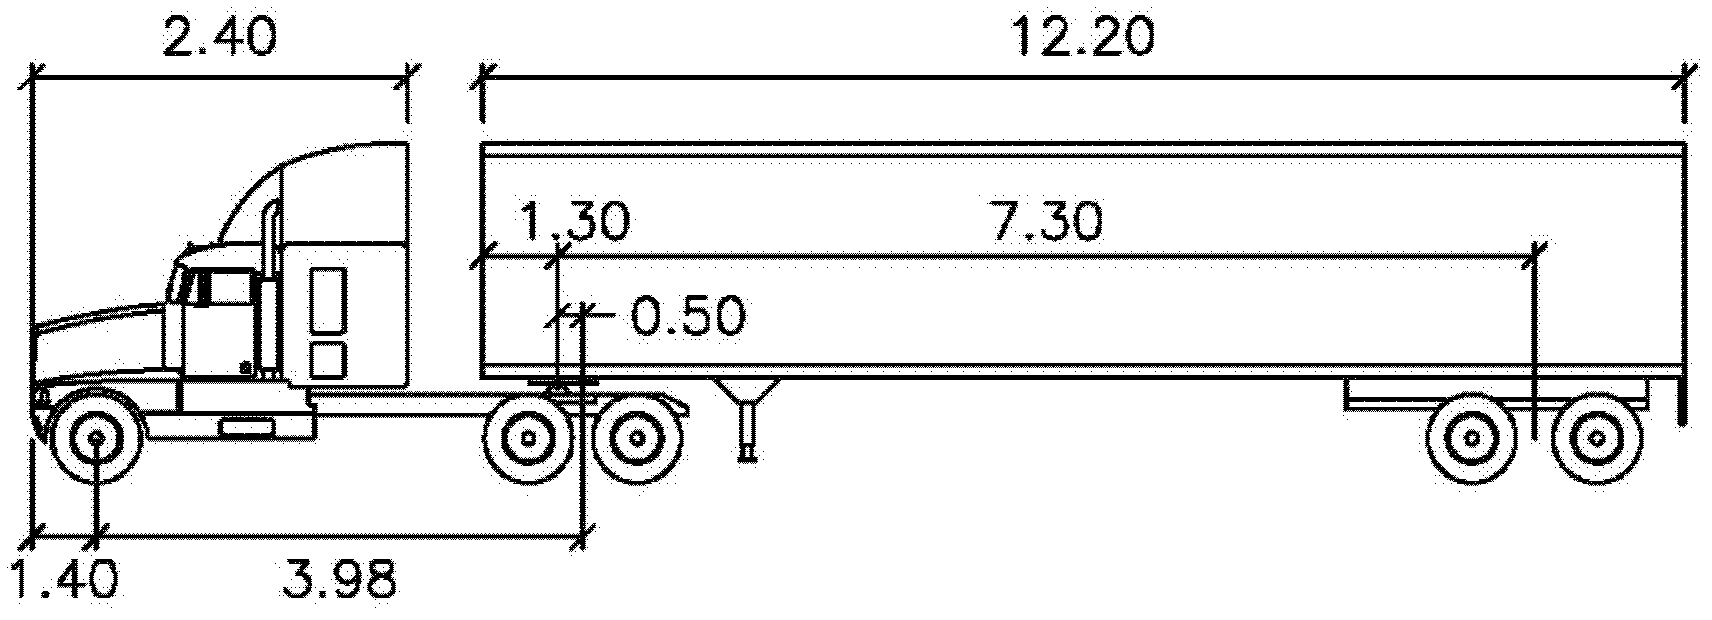 Right-turning lane design method by considering turning characteristic of large vehicle